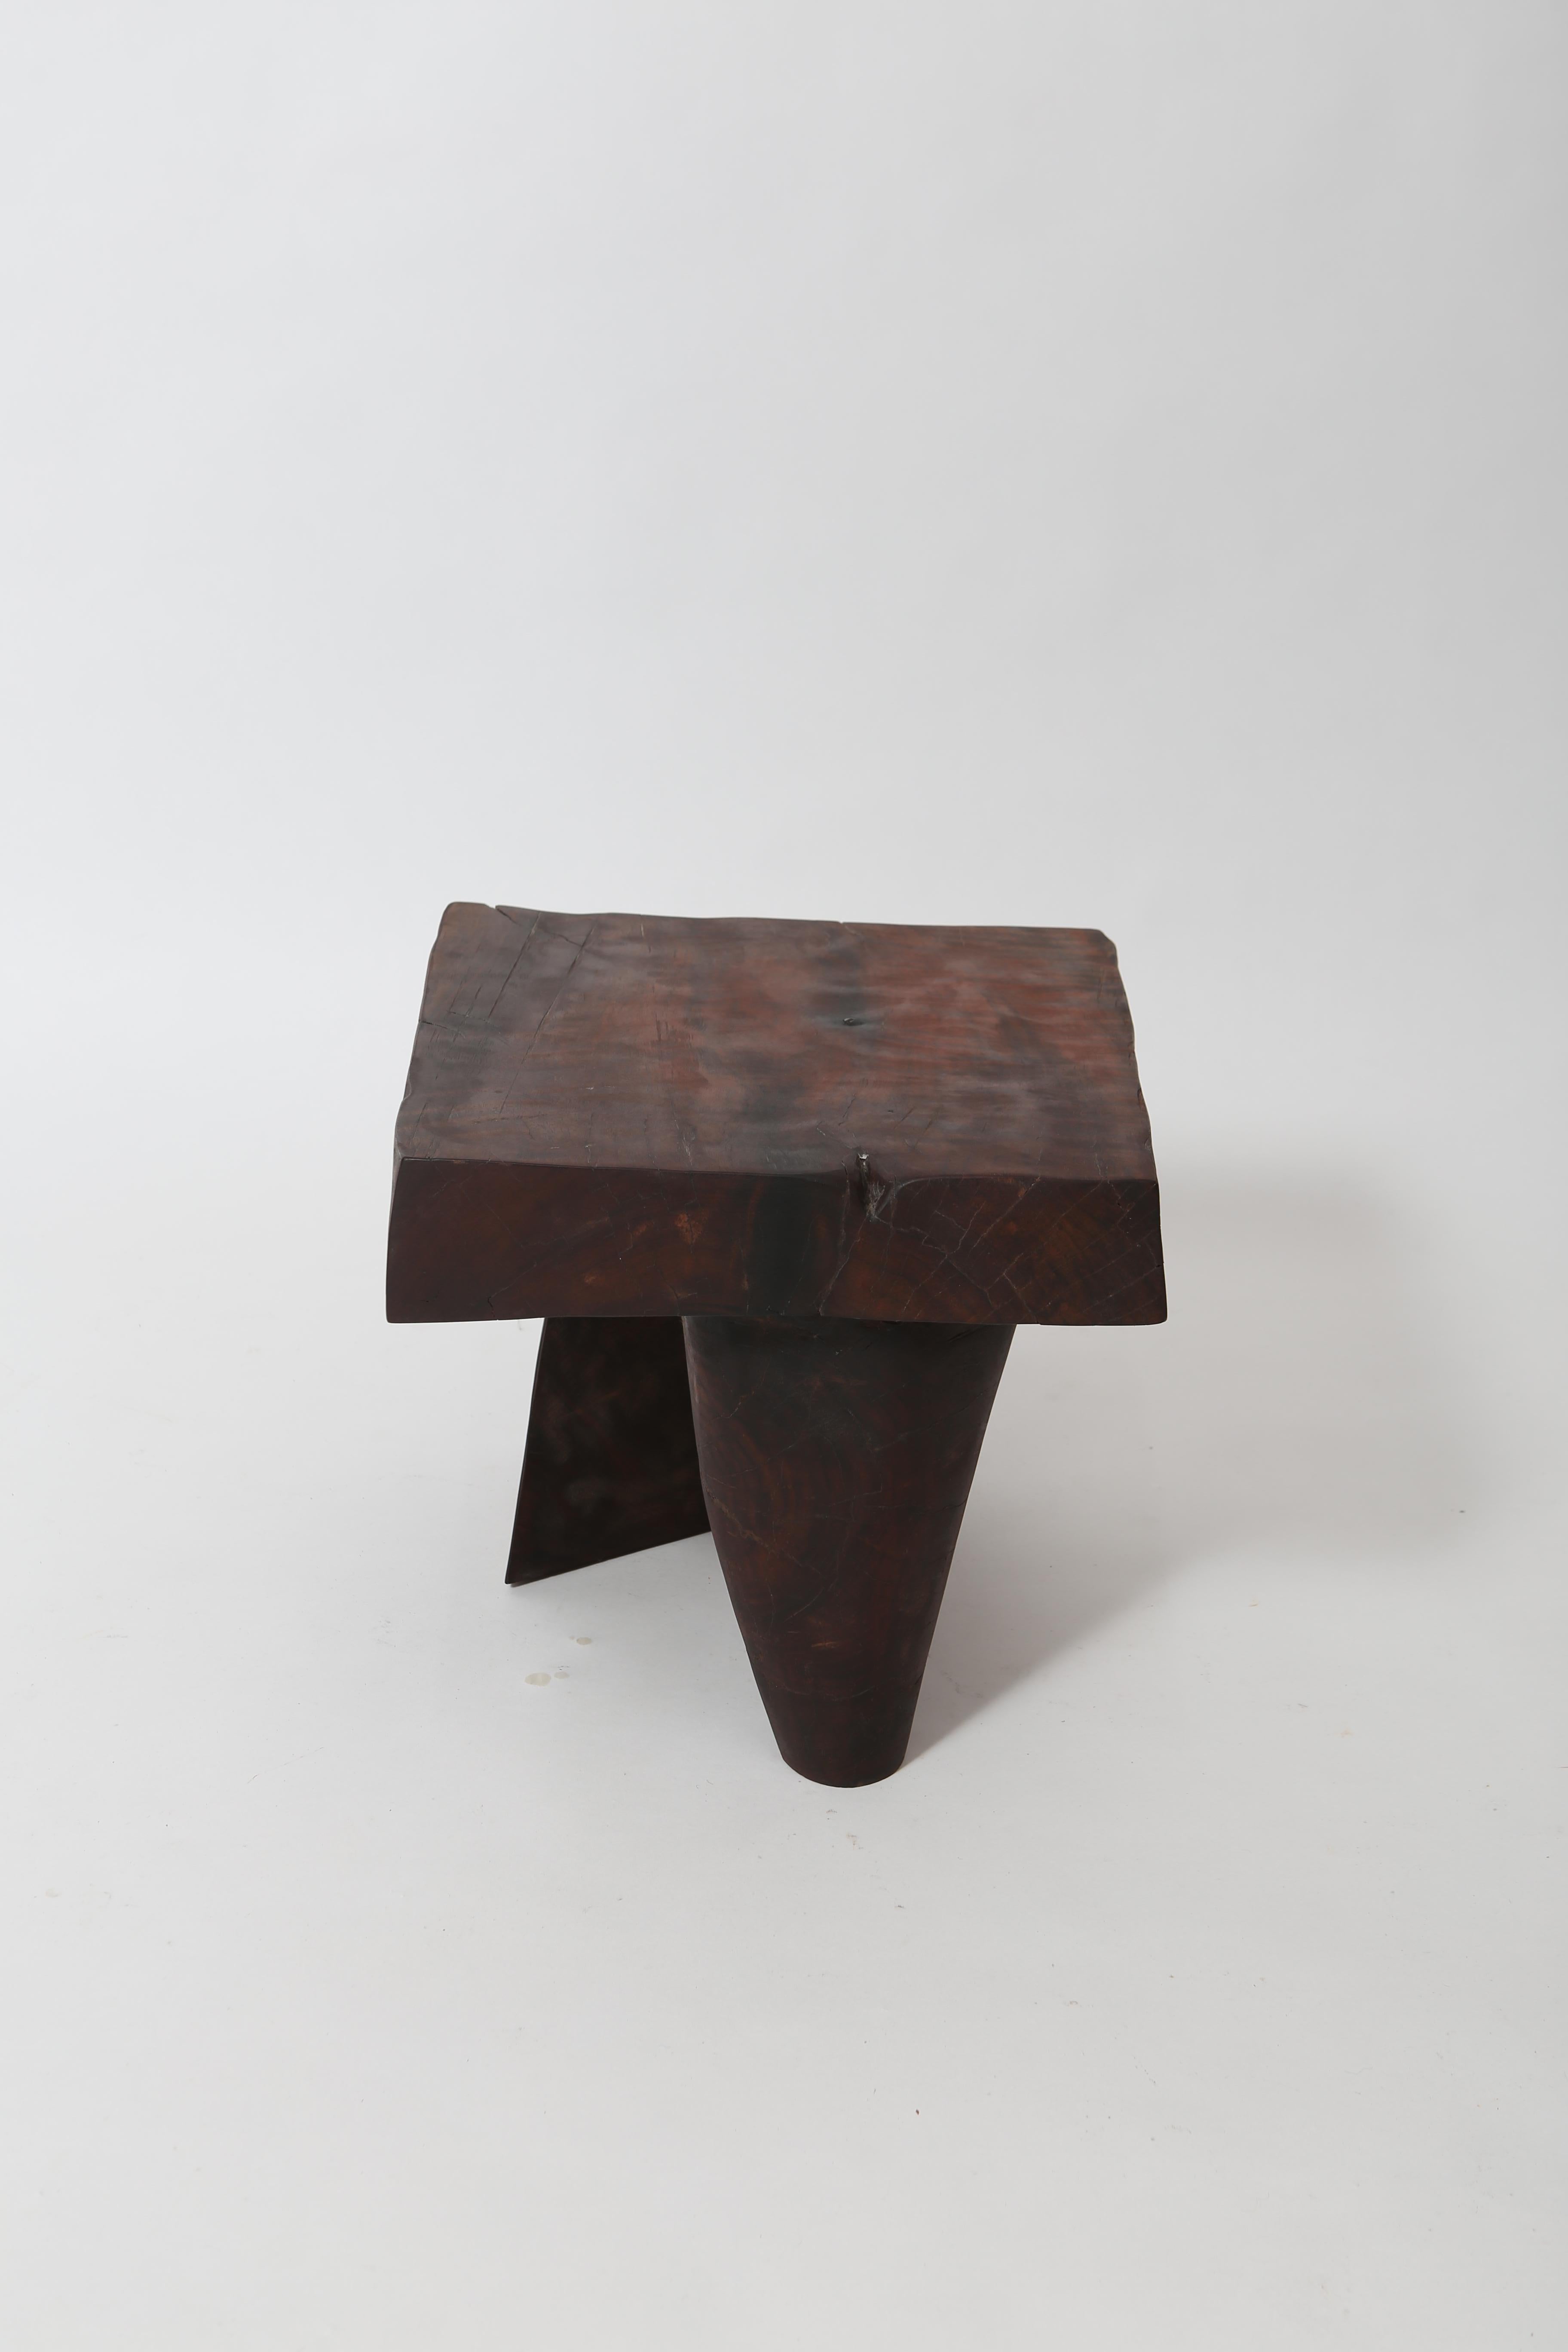 American Dolman Carved Wood Sculpture Table by Vince Skelly